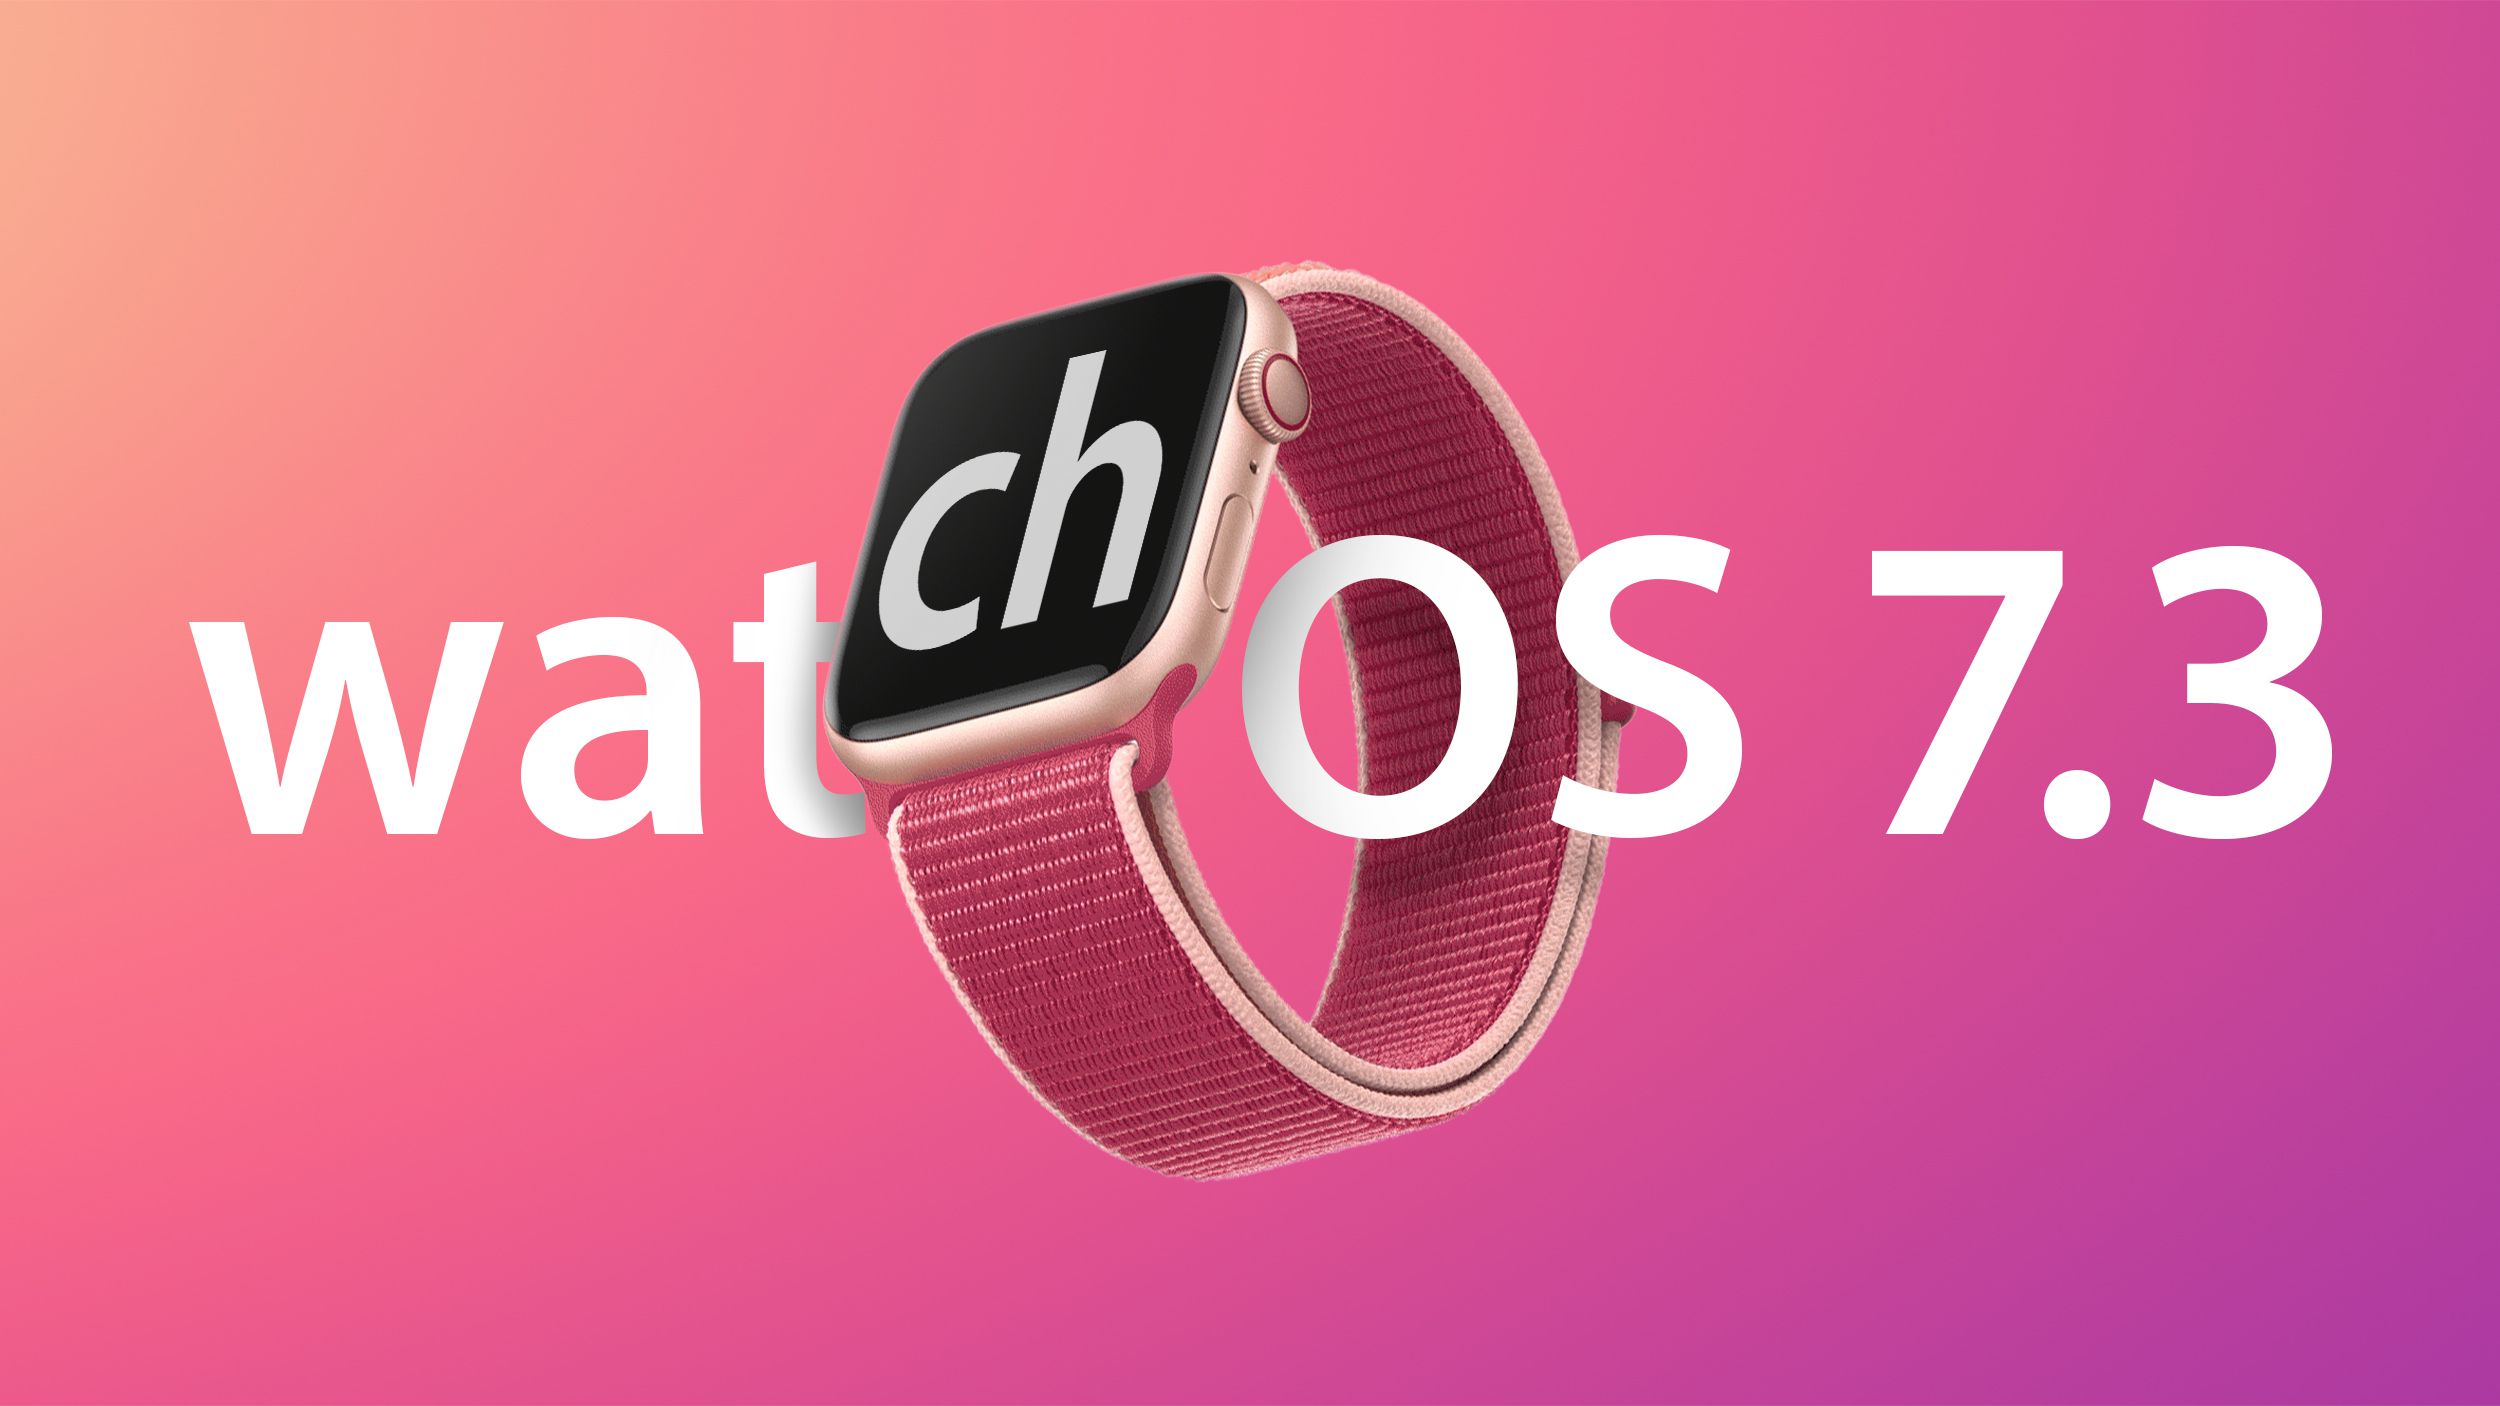 Apple launches watchOS 7.3 with Unity Watch Face, extended ECG availability and more